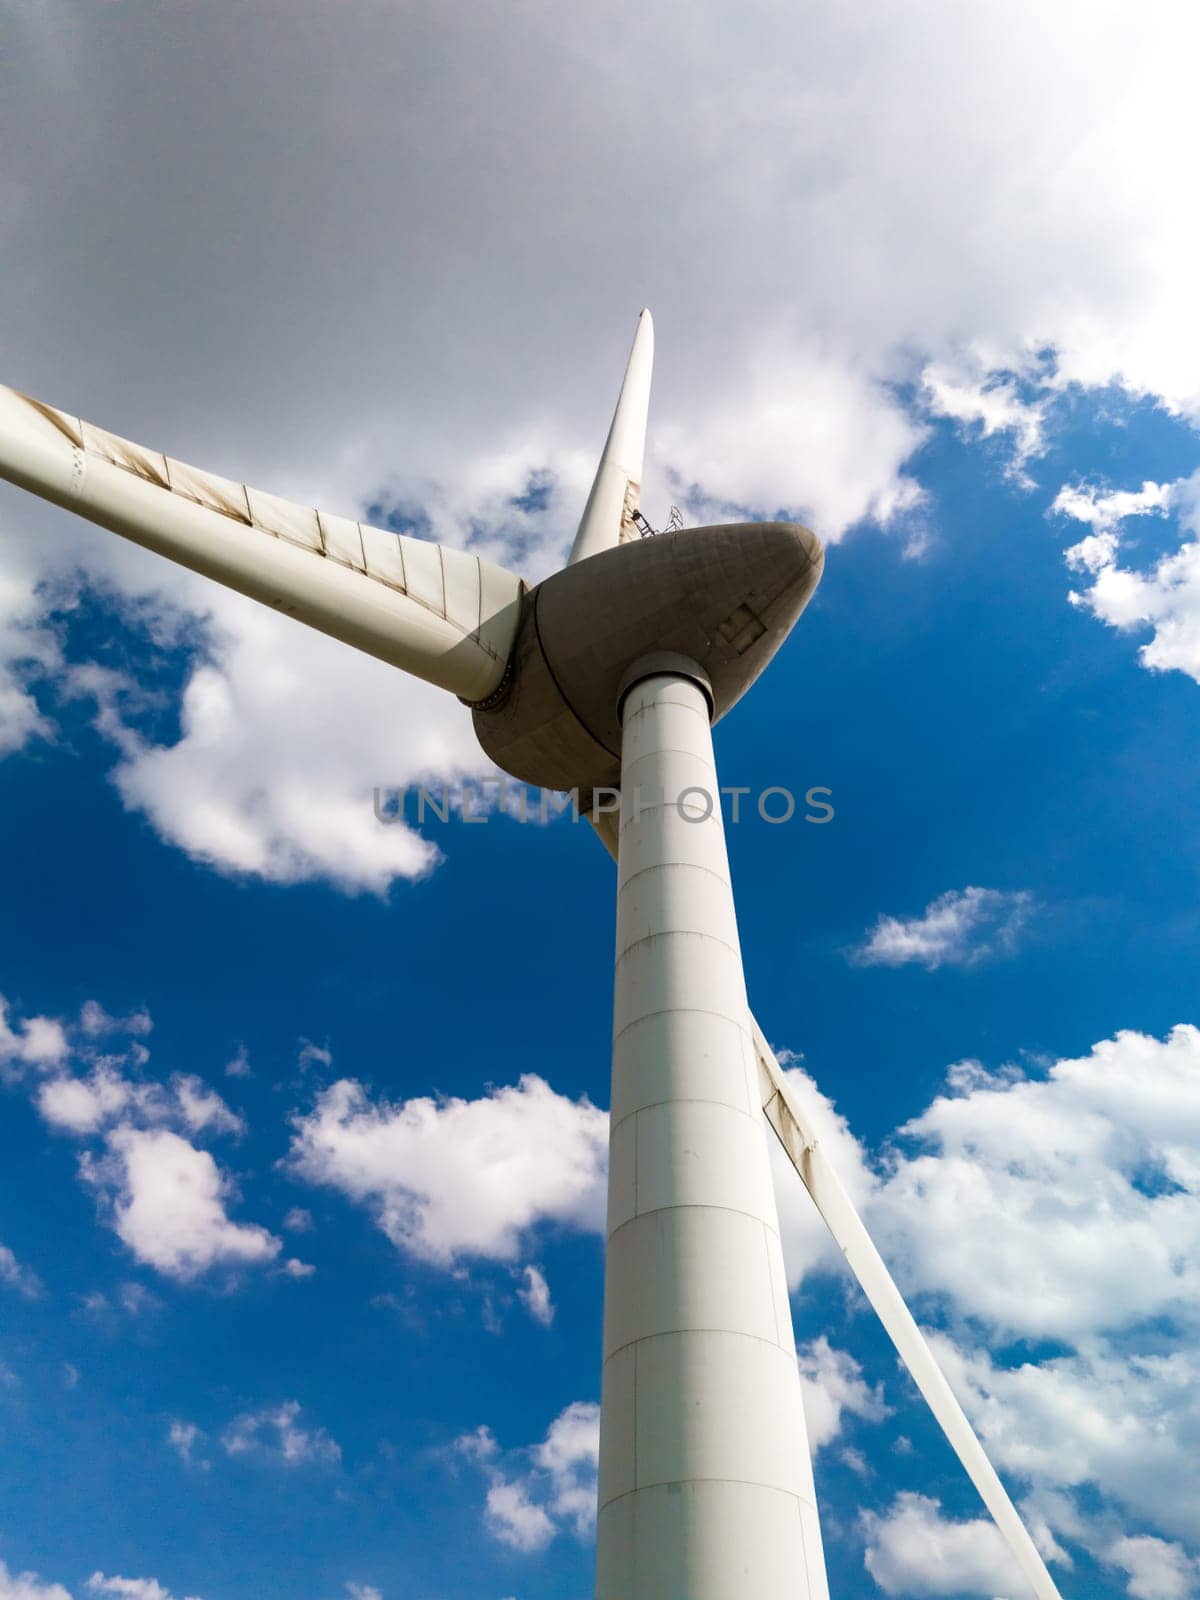 A wind turbine gracefully spins against a vibrant blue sky backdrop in Flevoland, Netherlands.